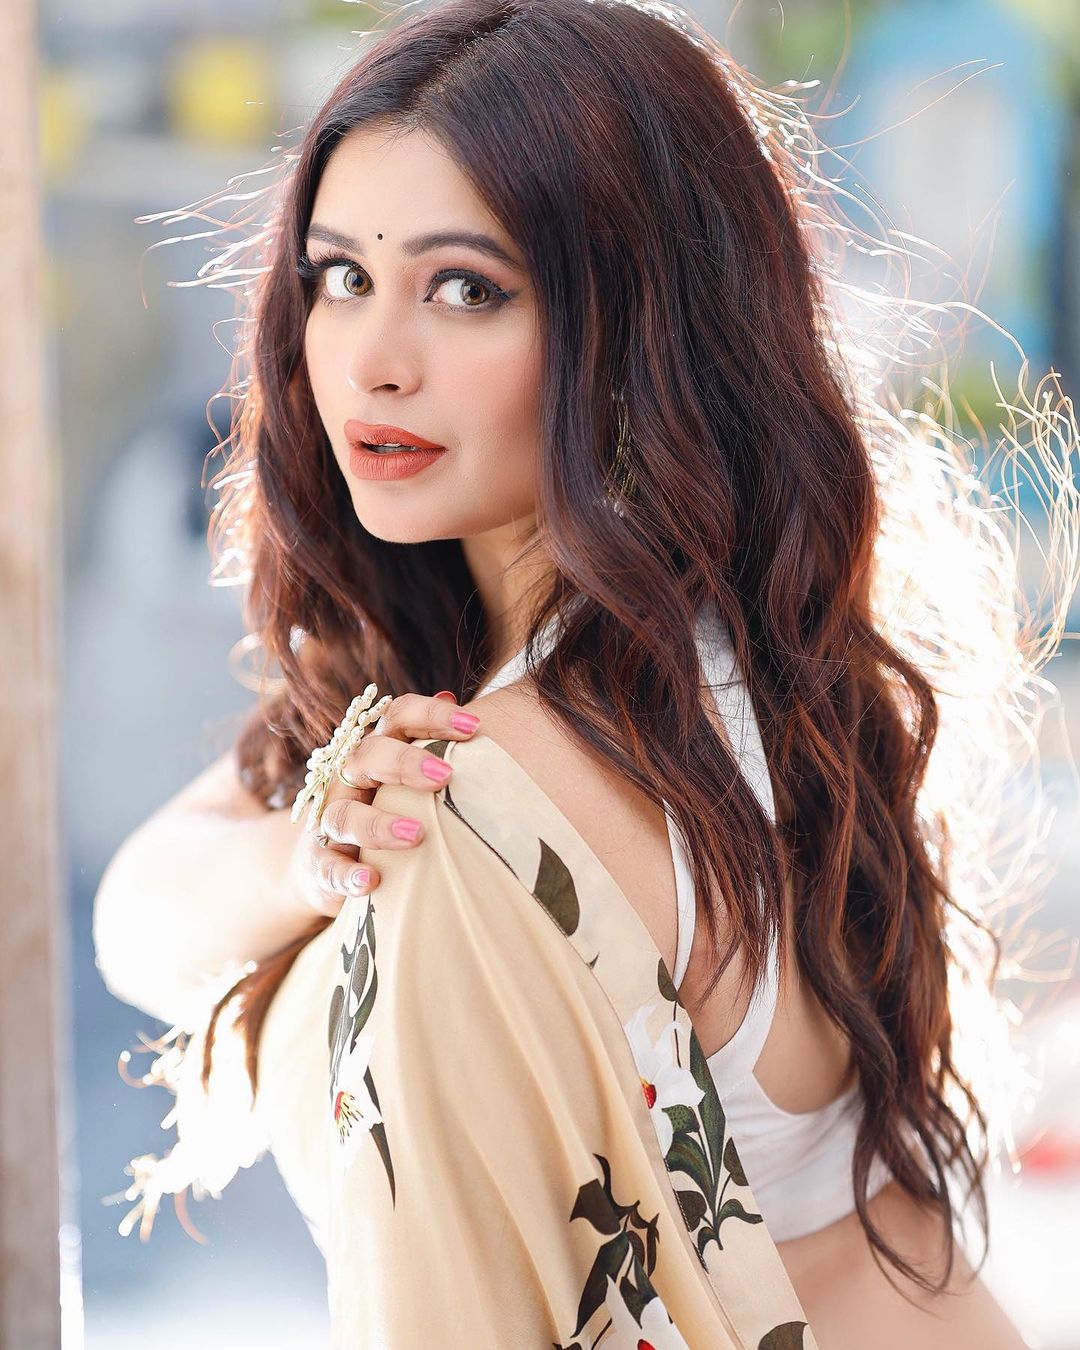 Actress ritabhari chakraborty increased her beauty- Photos,Spicy Hot Pics,Images,High Resolution WallPapers Download